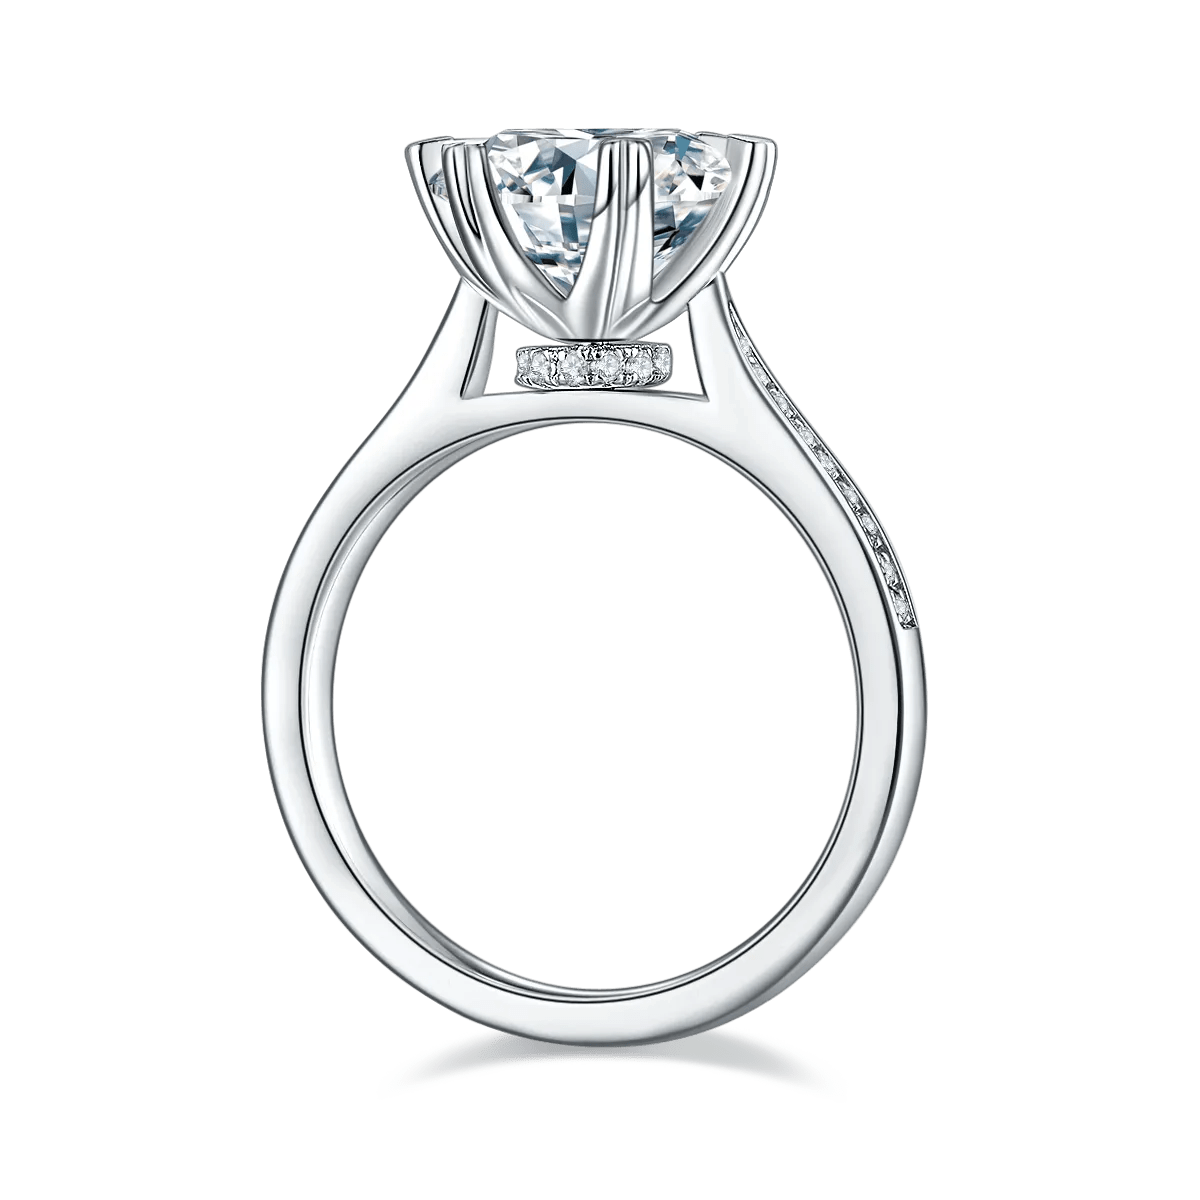 VVS Jewelry hip hop jewelry 3CT S925 Sterling Silver 6-Prong Cathedral Heart Engagement Ring